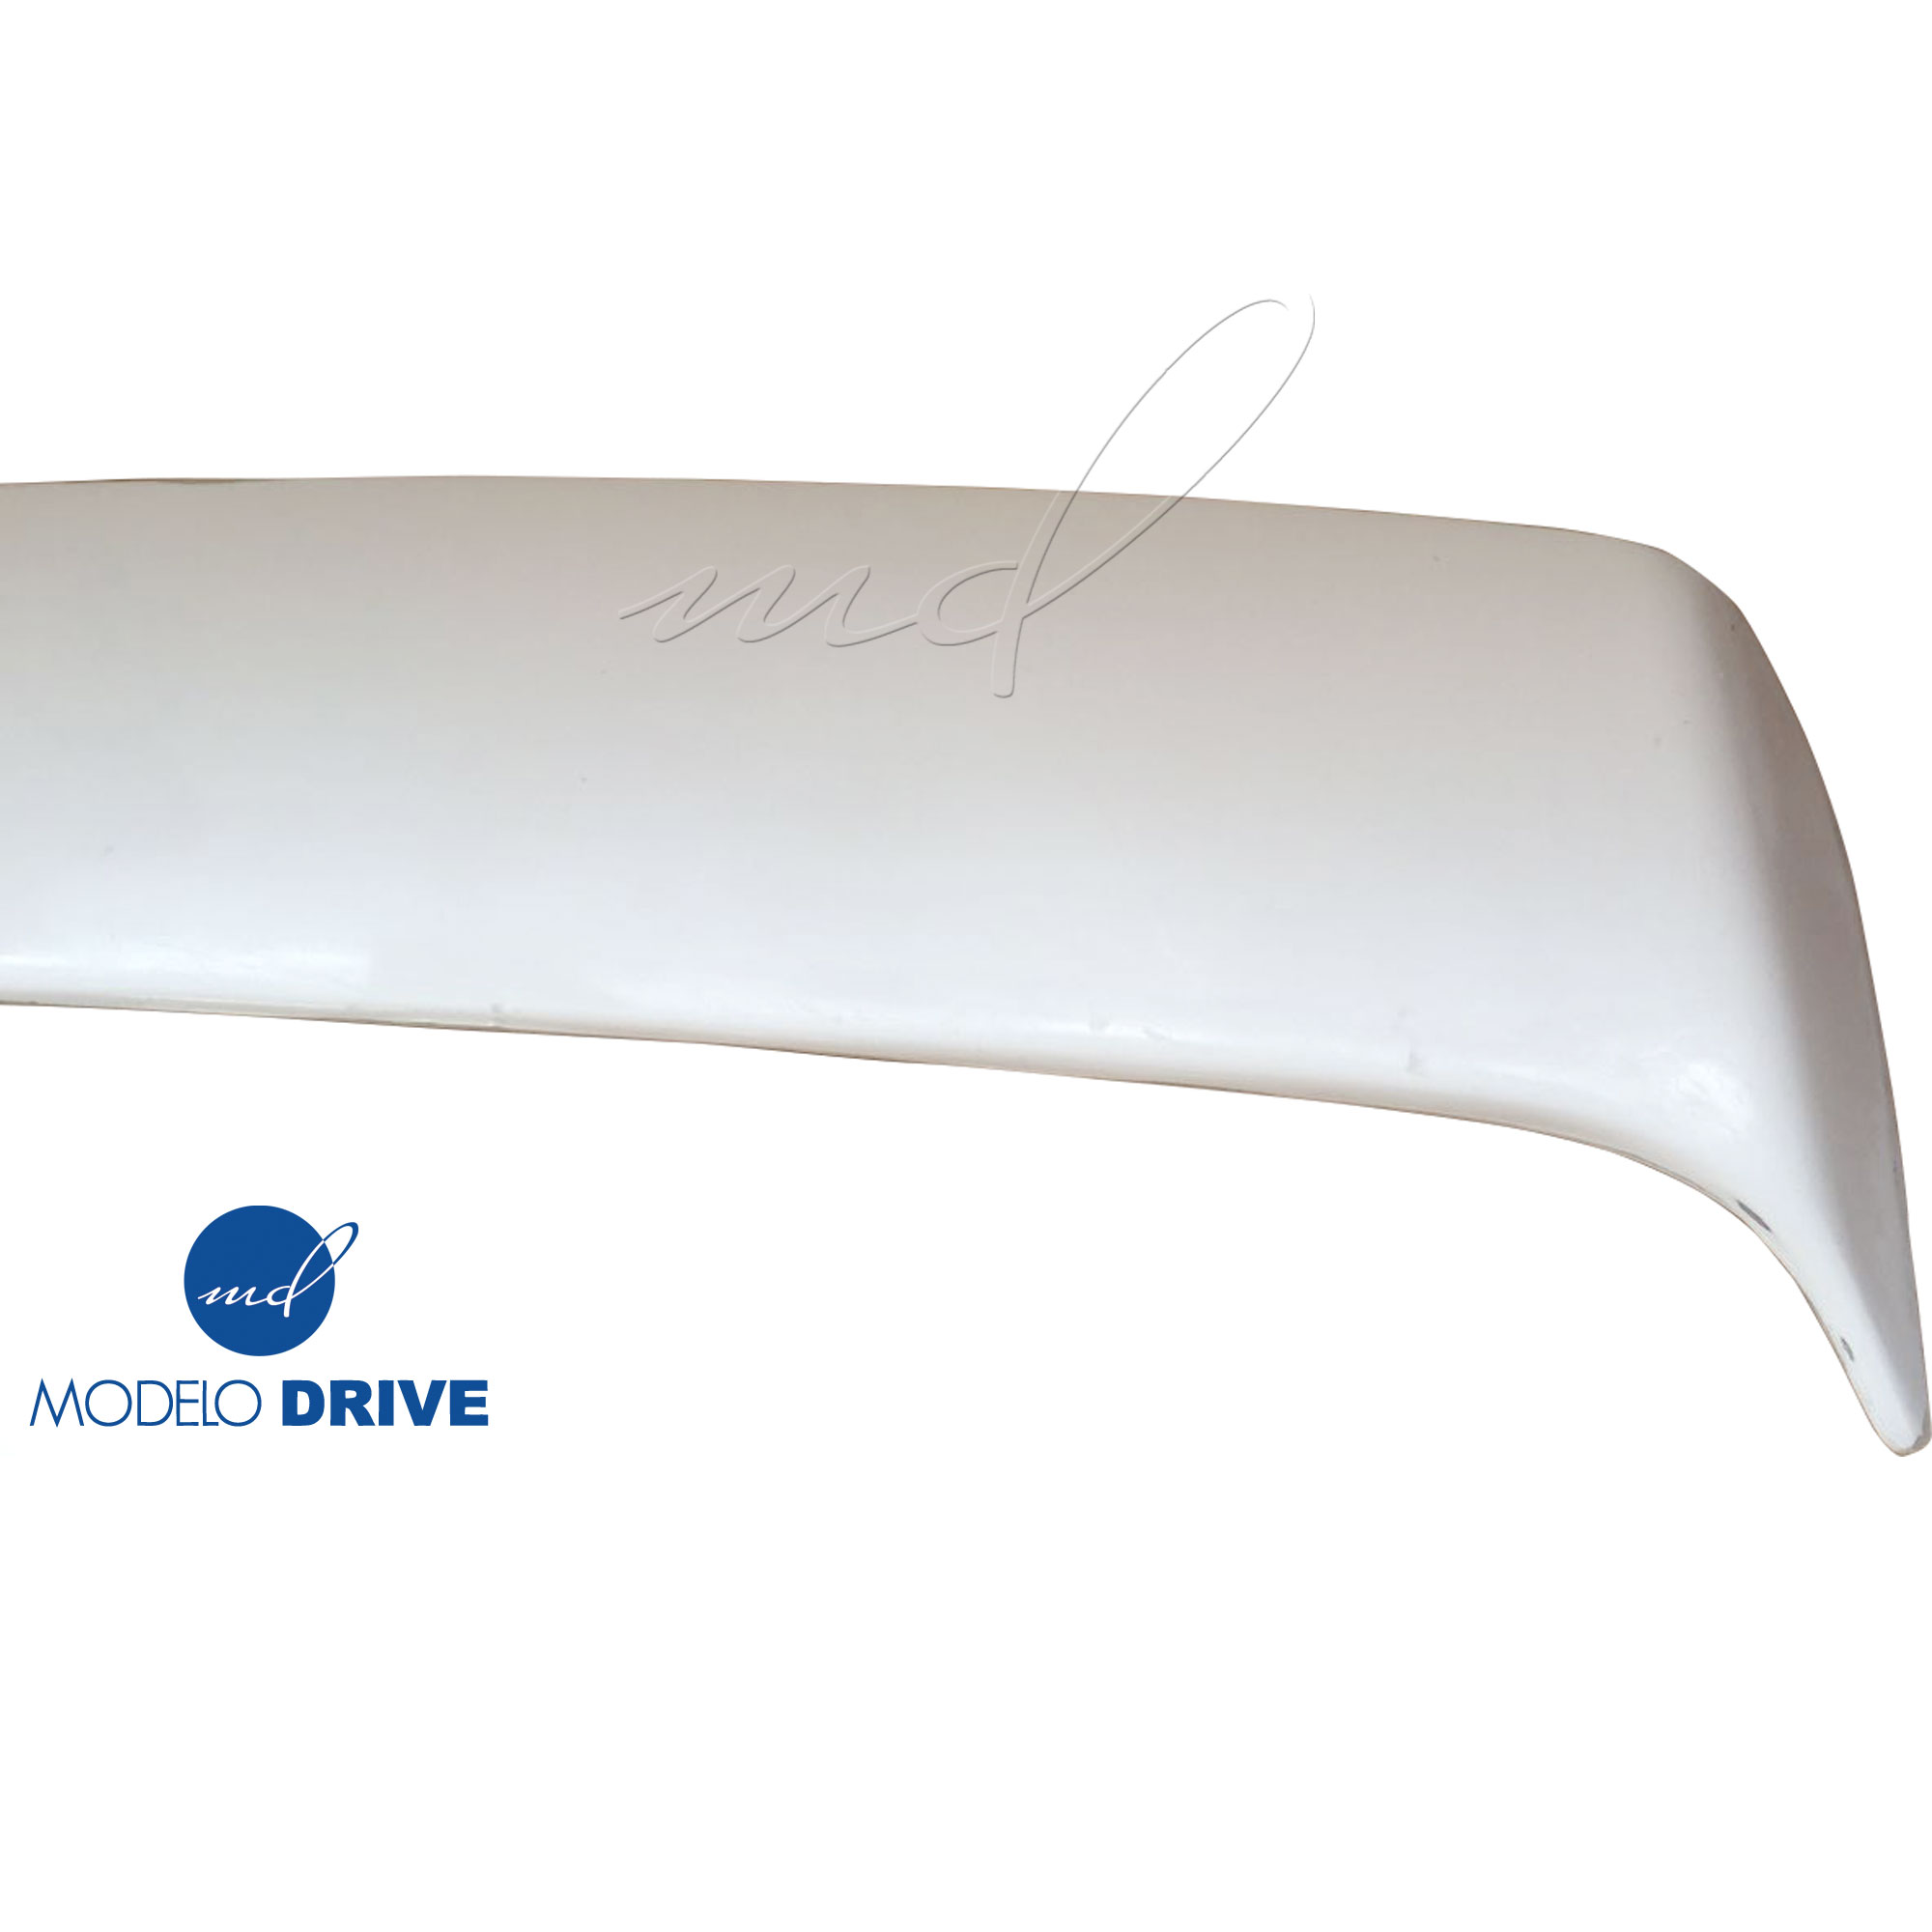 ModeloDrive FRP DMA Trunk Spoiler Wing > Nissan Skyline R32 1990-1994 > 2dr Coupe - Image 7